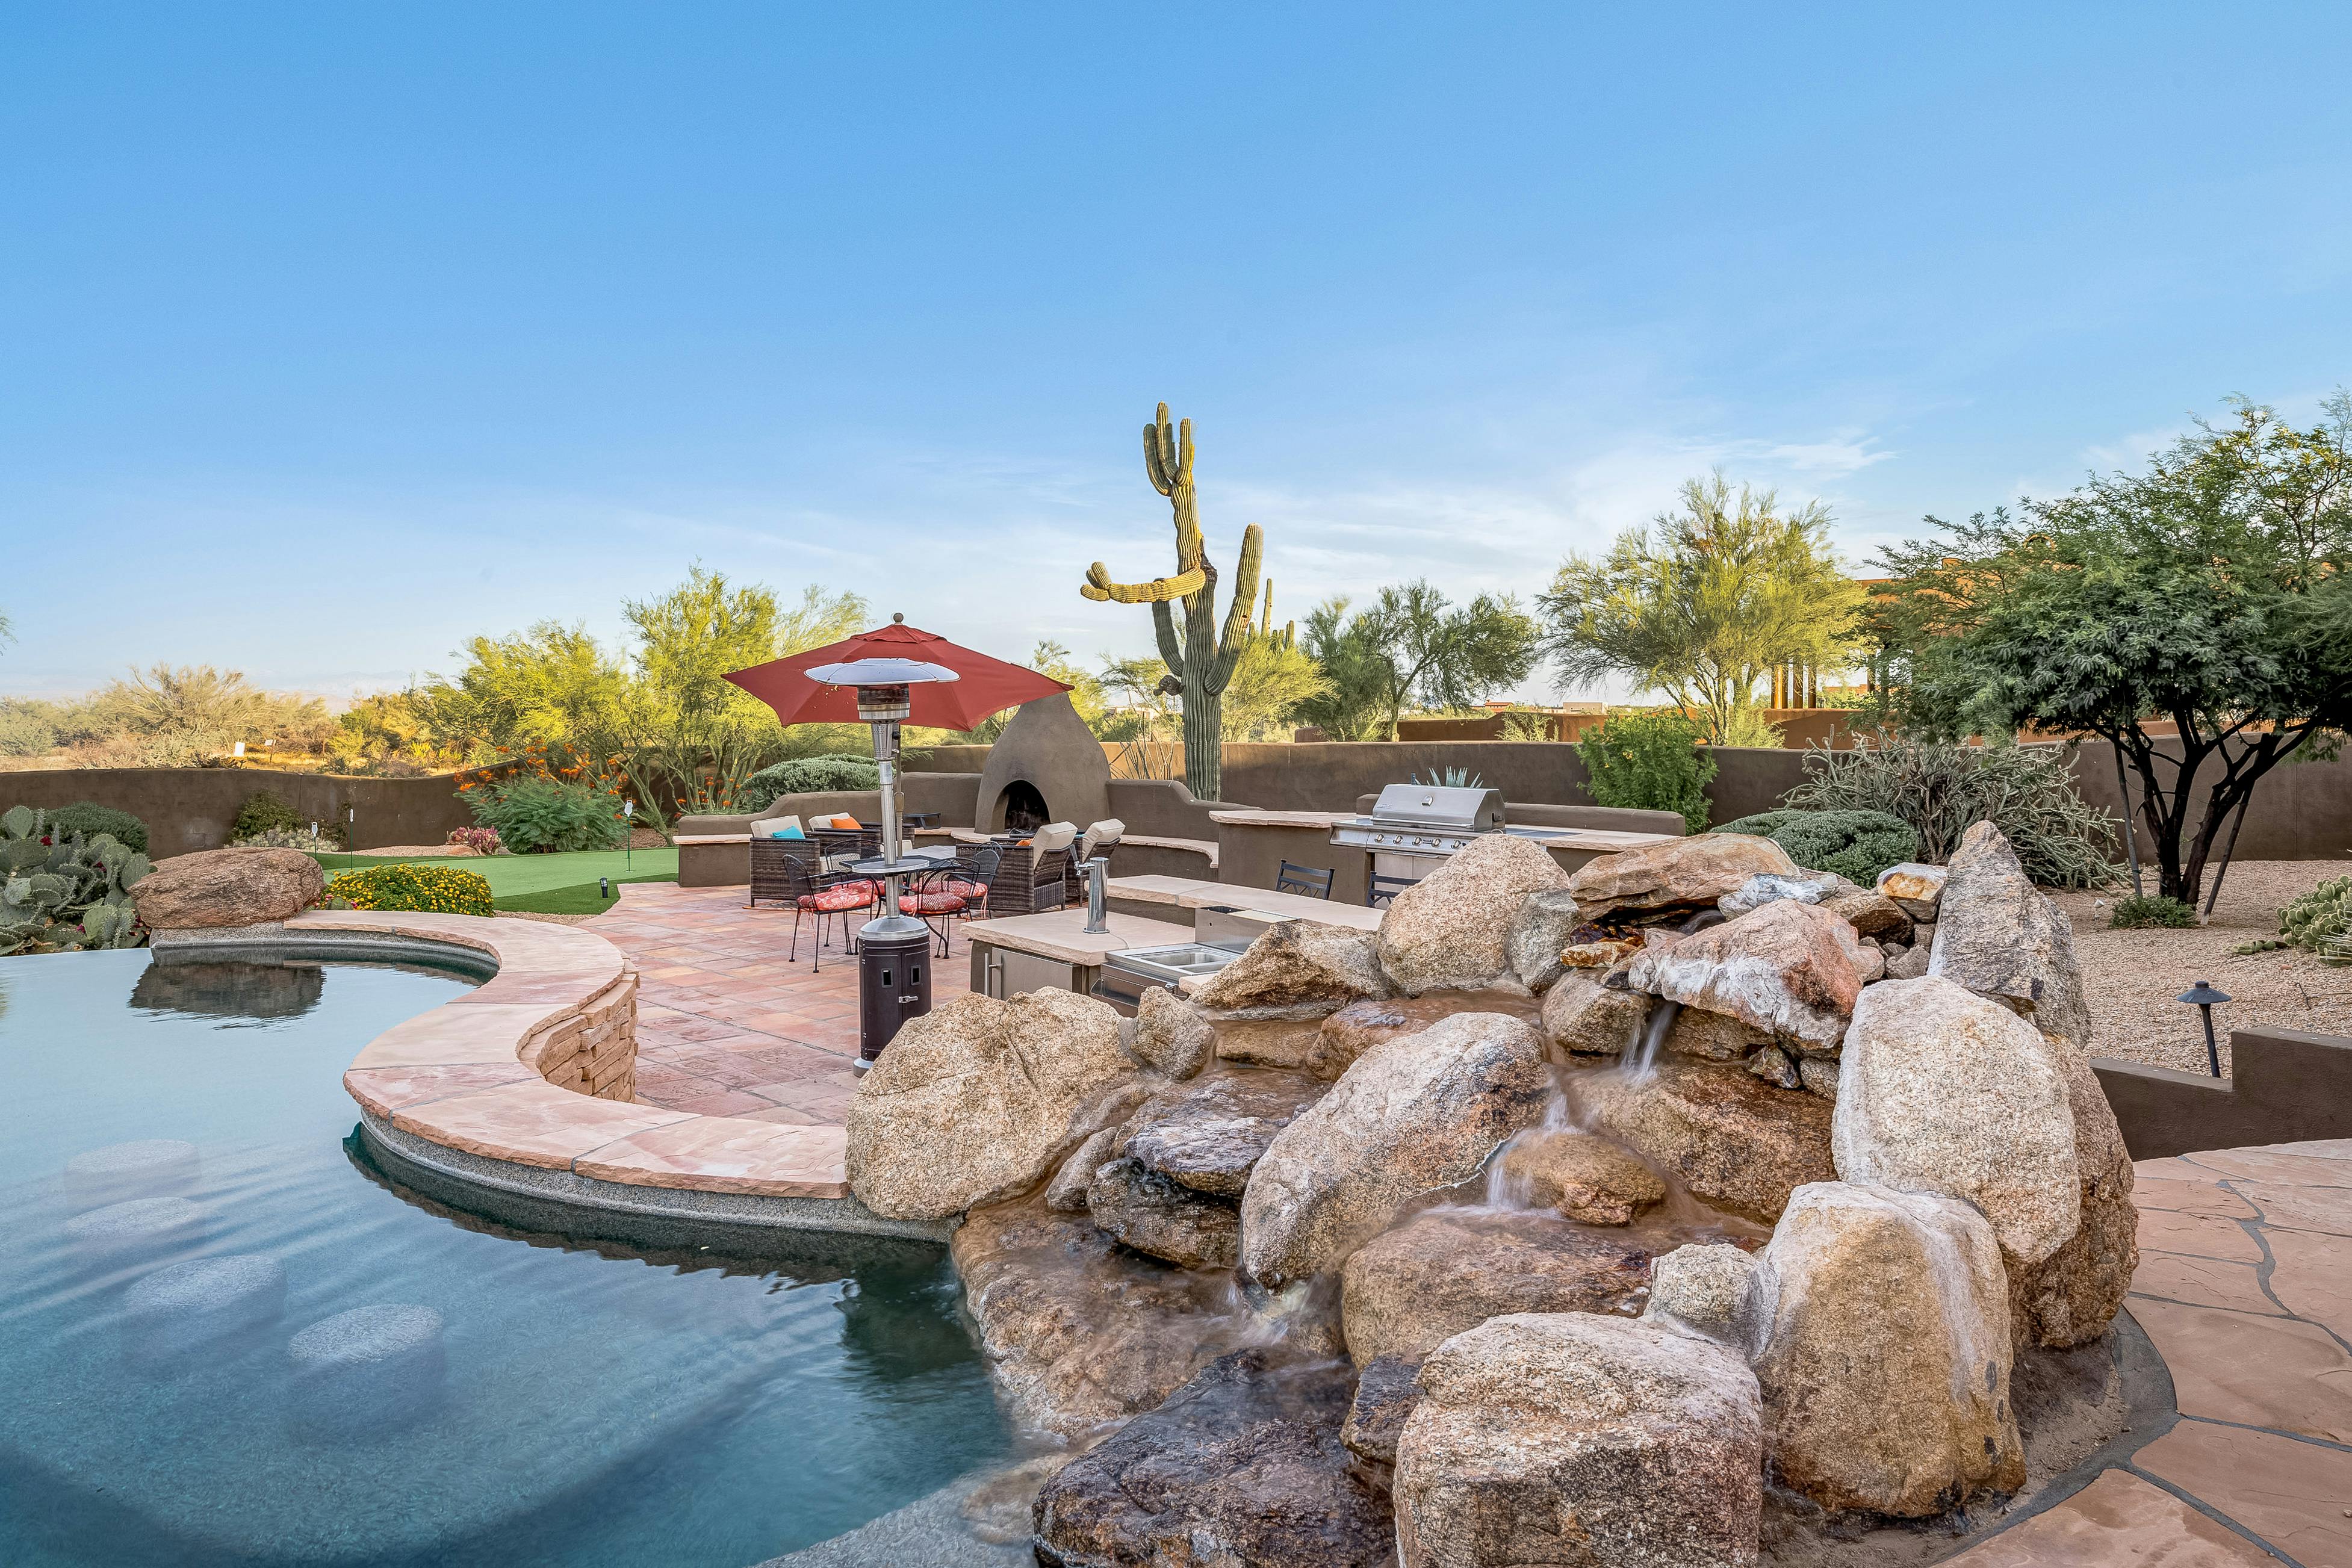 backyard of scottsdale, az vacation home with infinity pool and desert landscaping